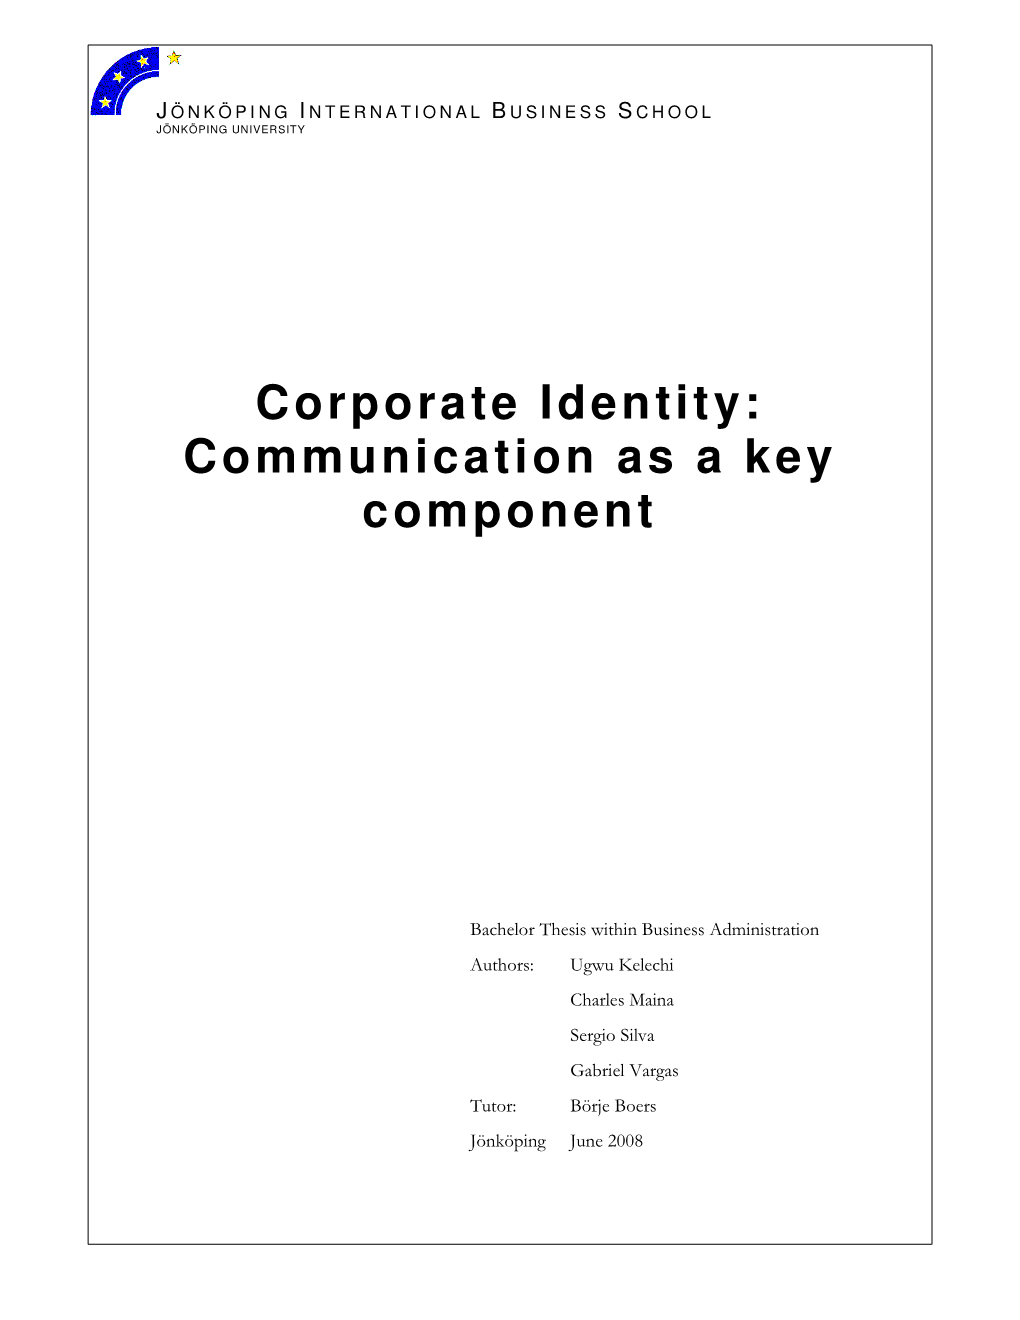 Corporate Identity: Communication As a Key Component